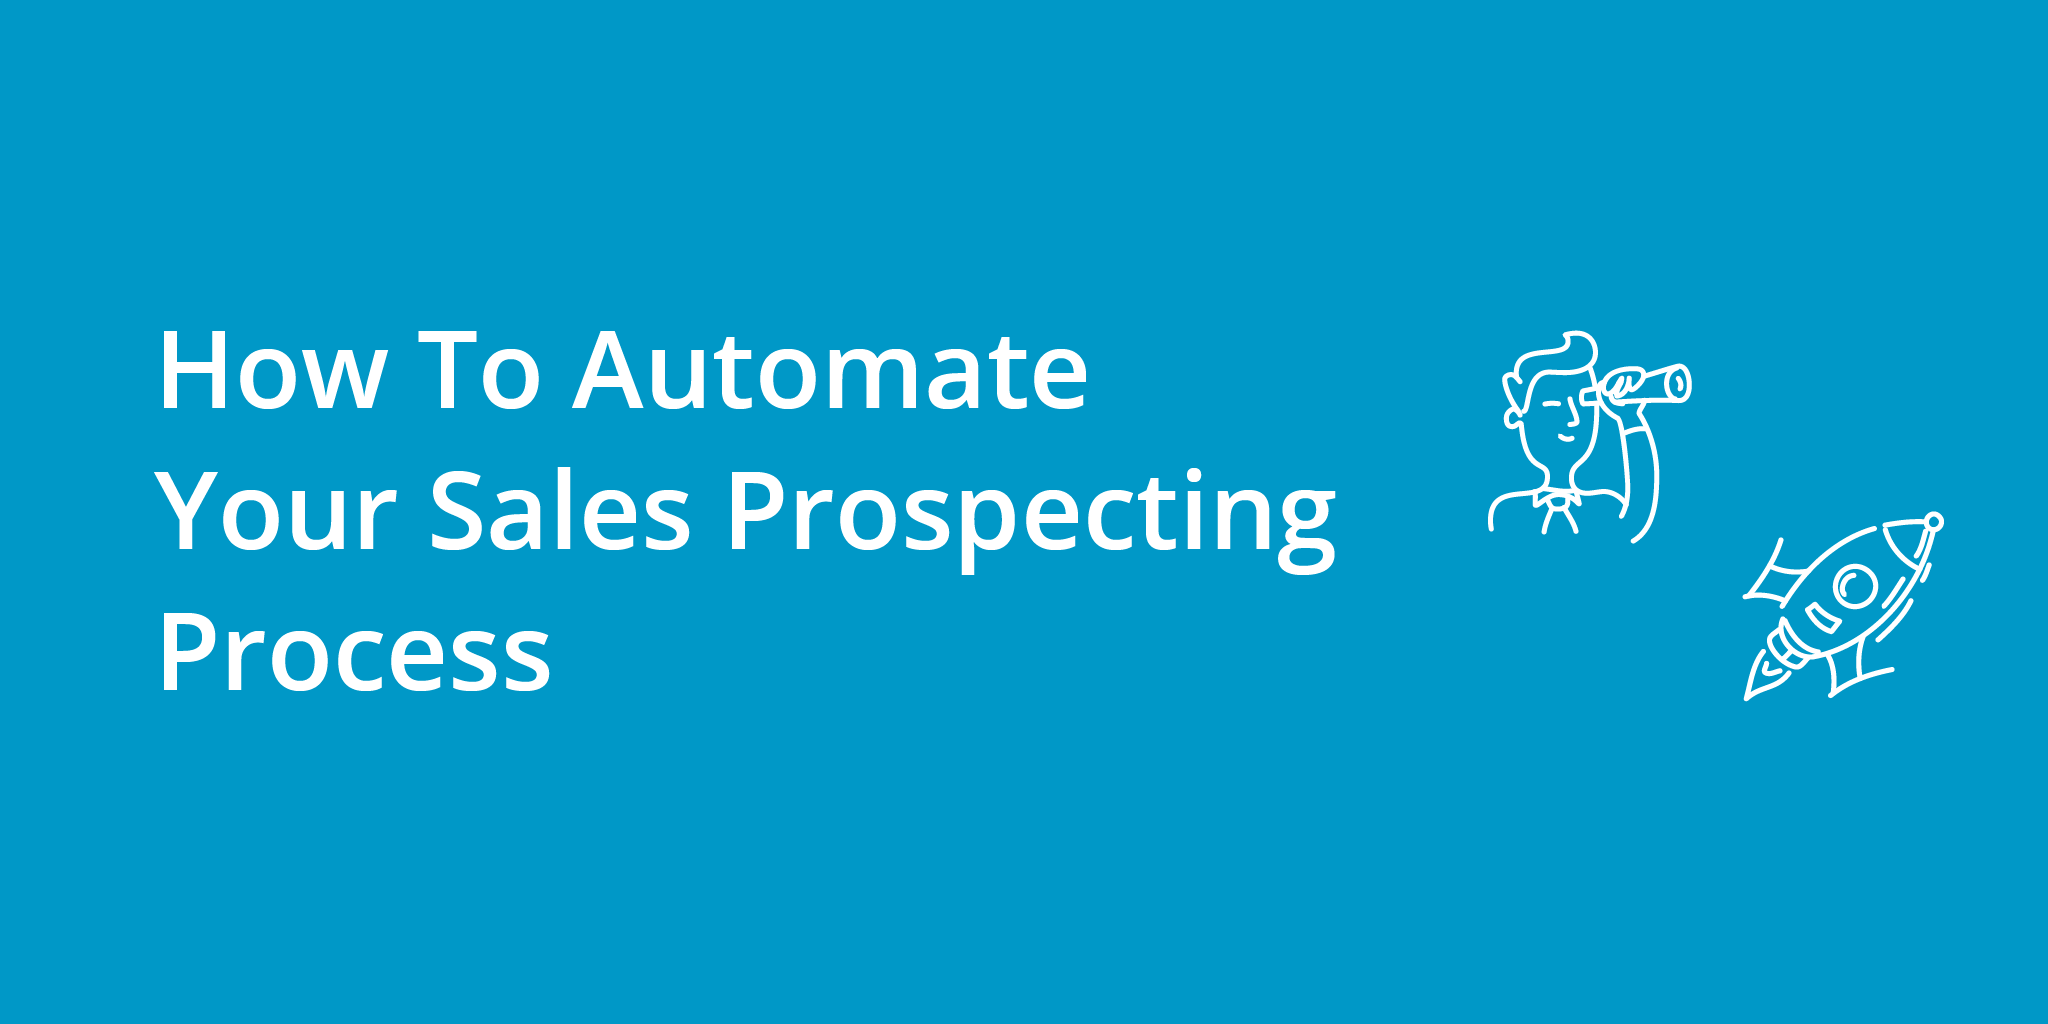 How To Automate Your Sales Prospecting Process | Telephones for business